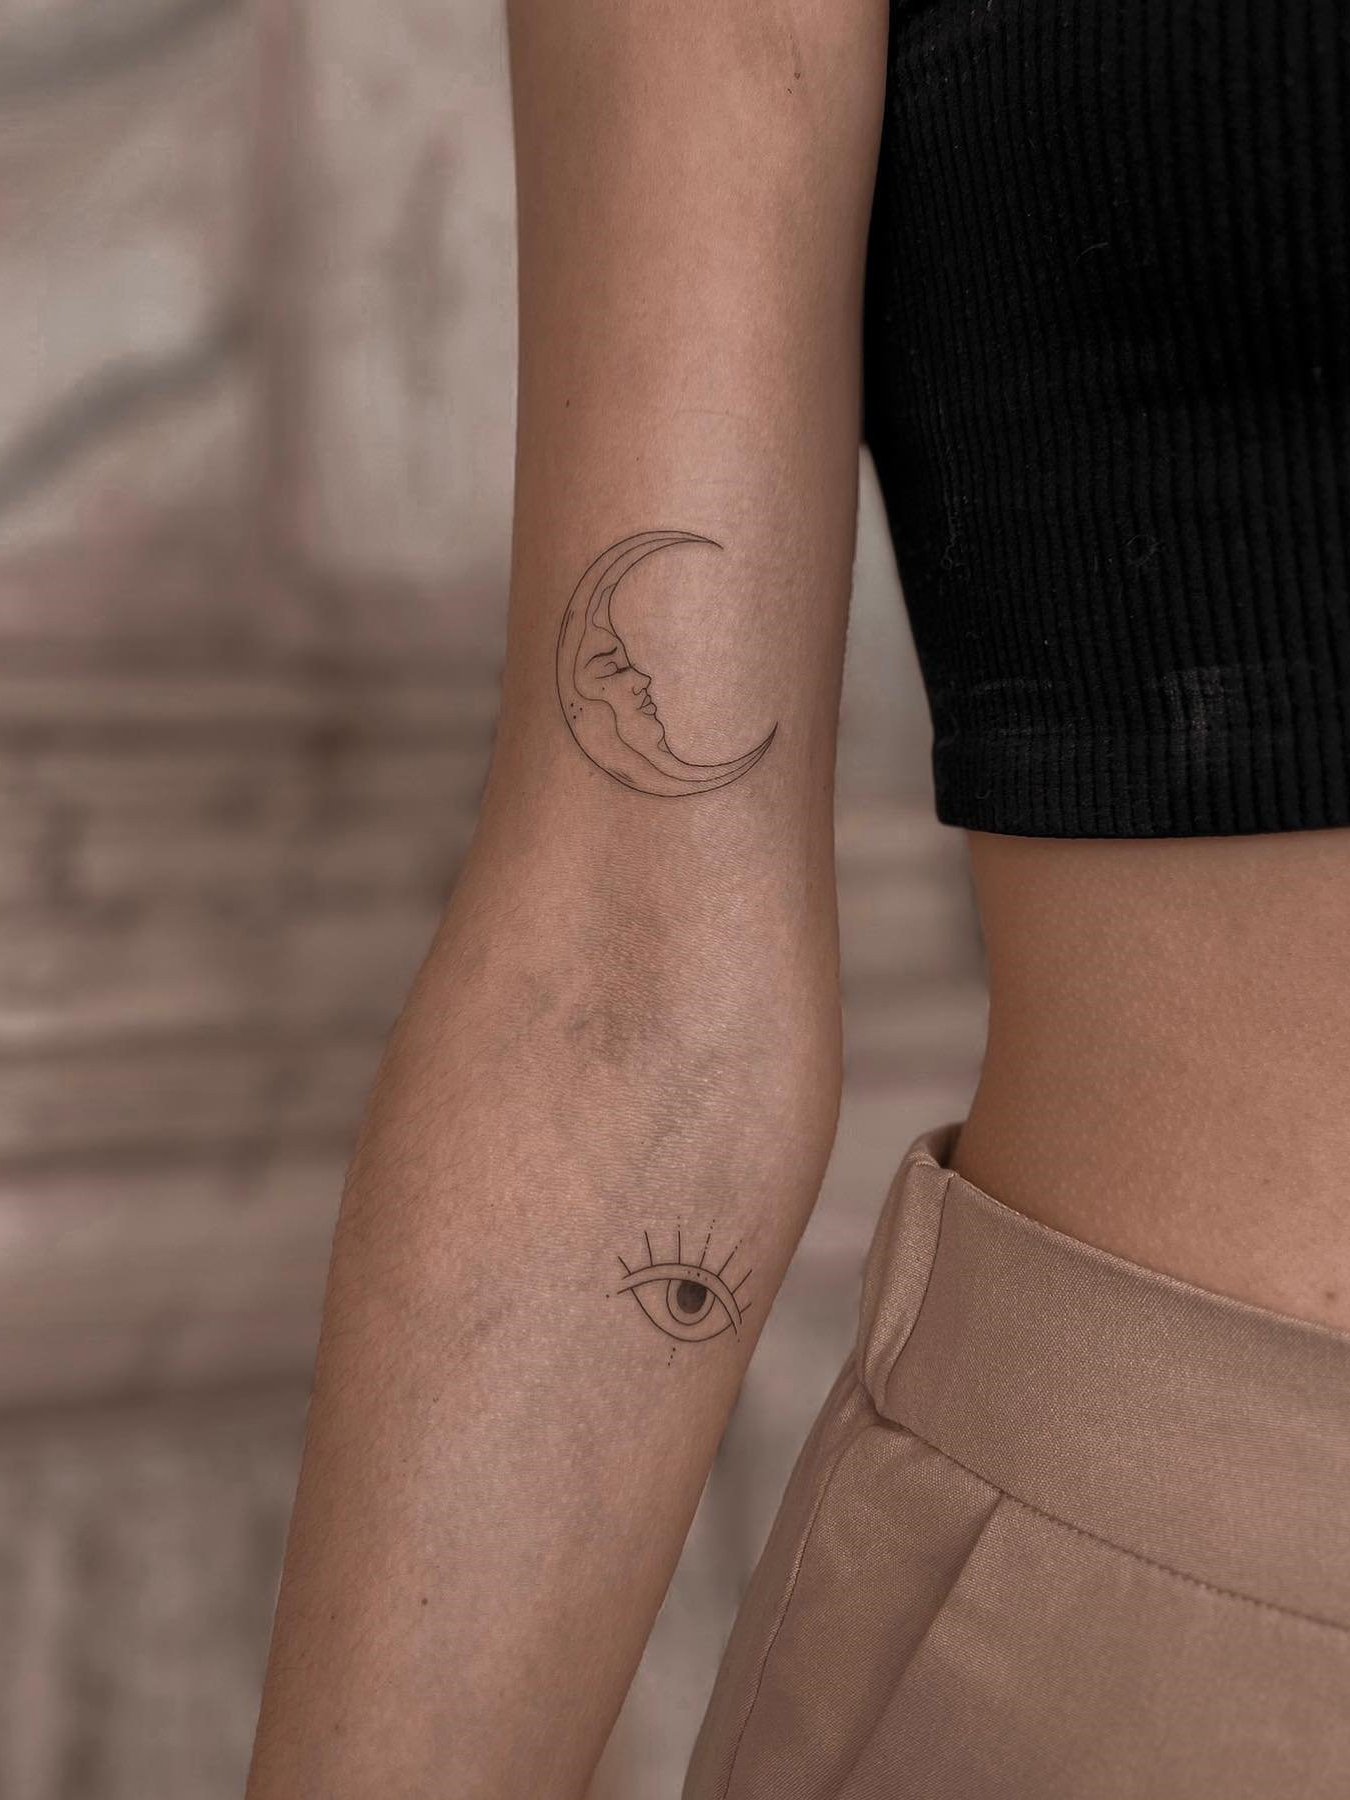 30 Small Inner Arm Tattoos for Females